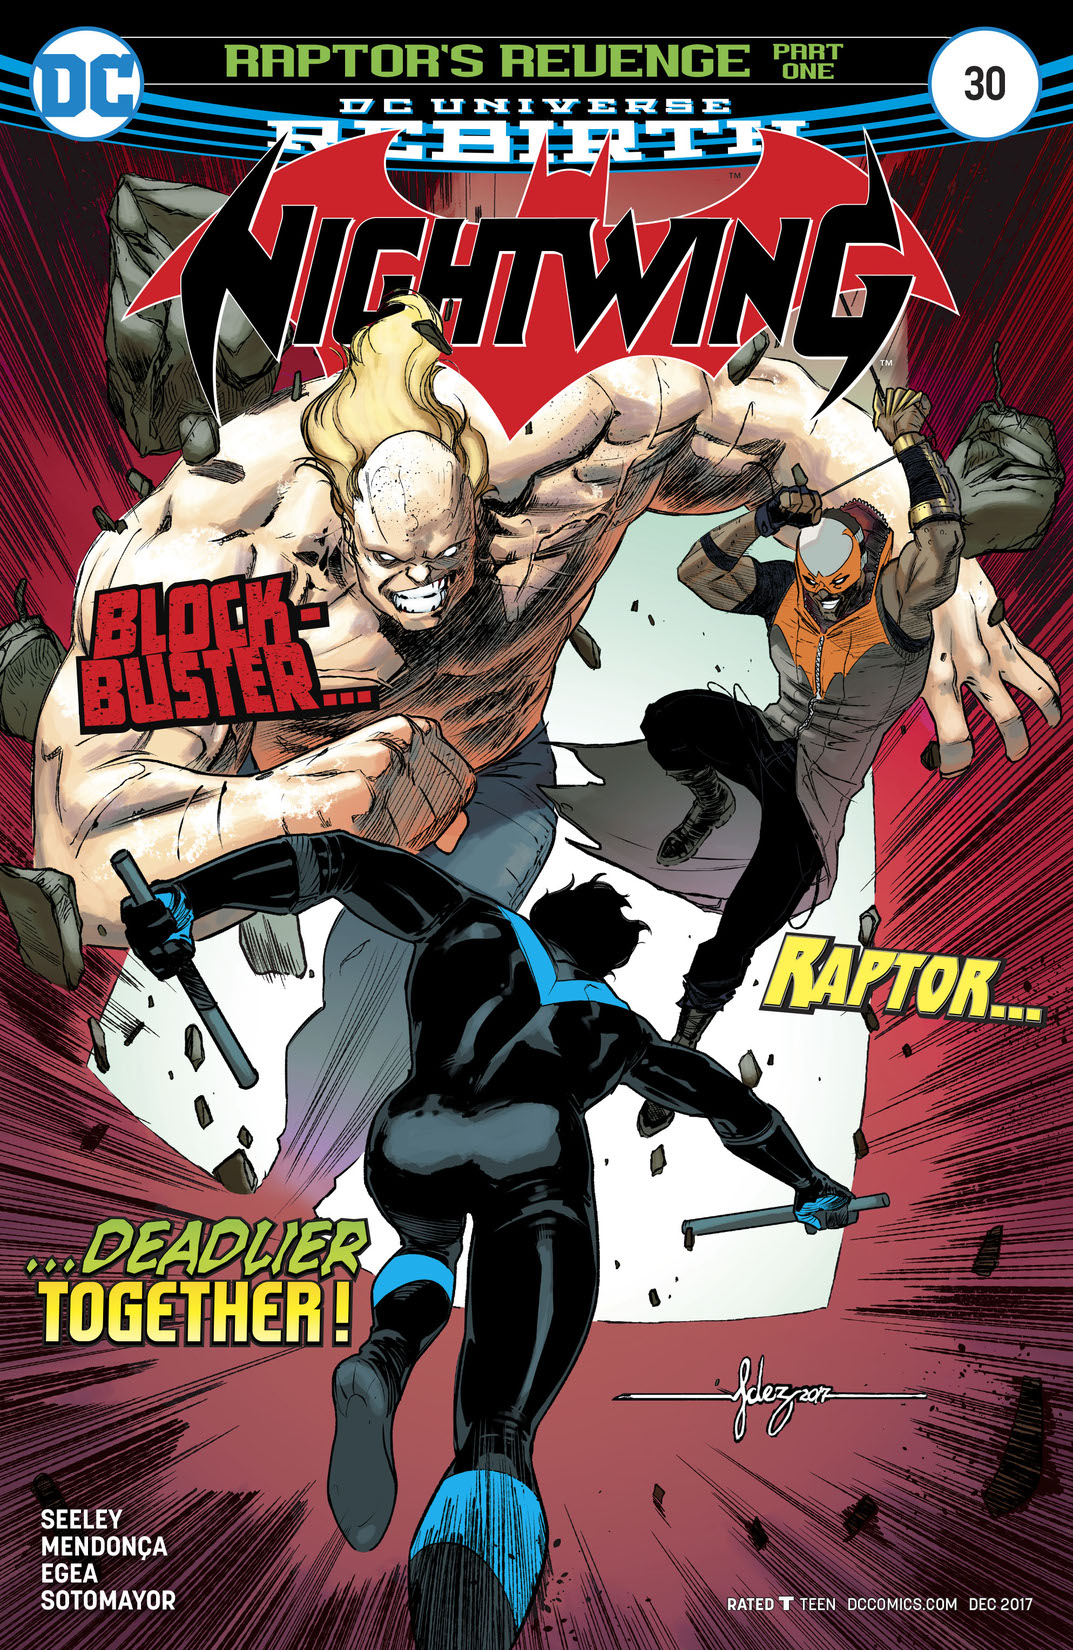 Nightwing (2016-) #30 preview images